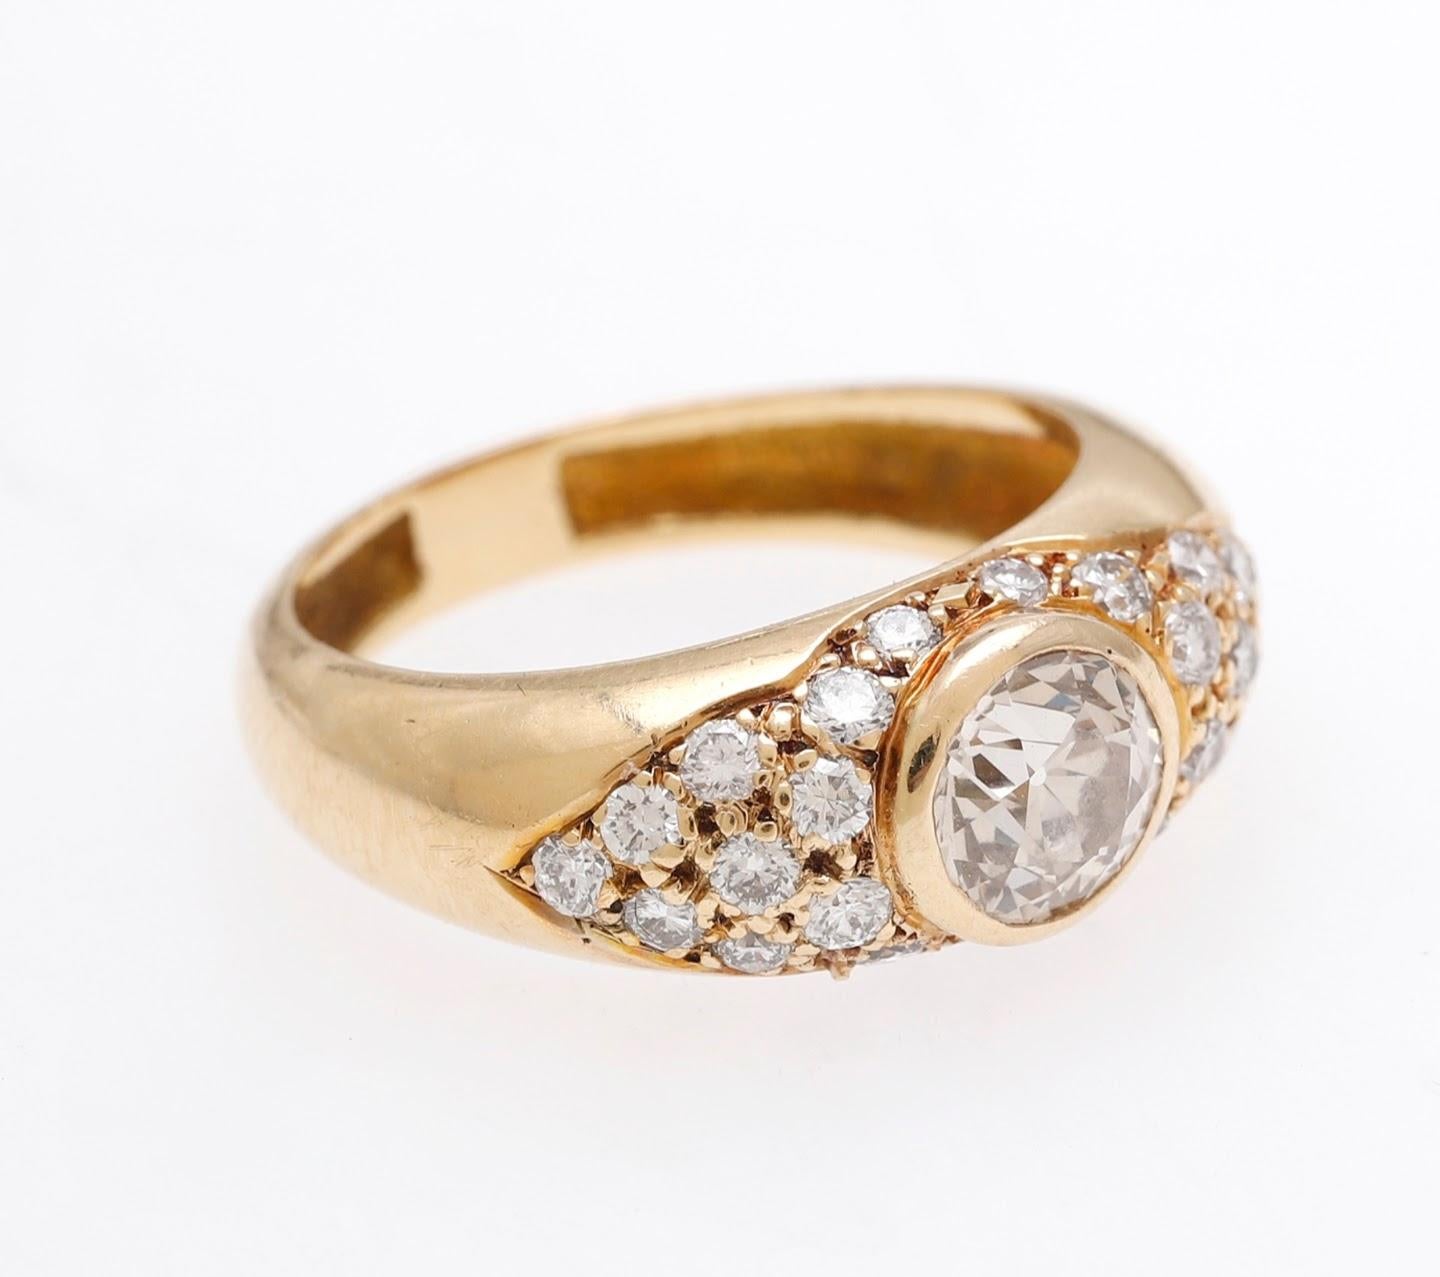 French Ring Diamond Old European Cut 1 05 Carats Yellow Gold 18 Karatt In Good Condition For Sale In Valencia, Comunidad Valenciana